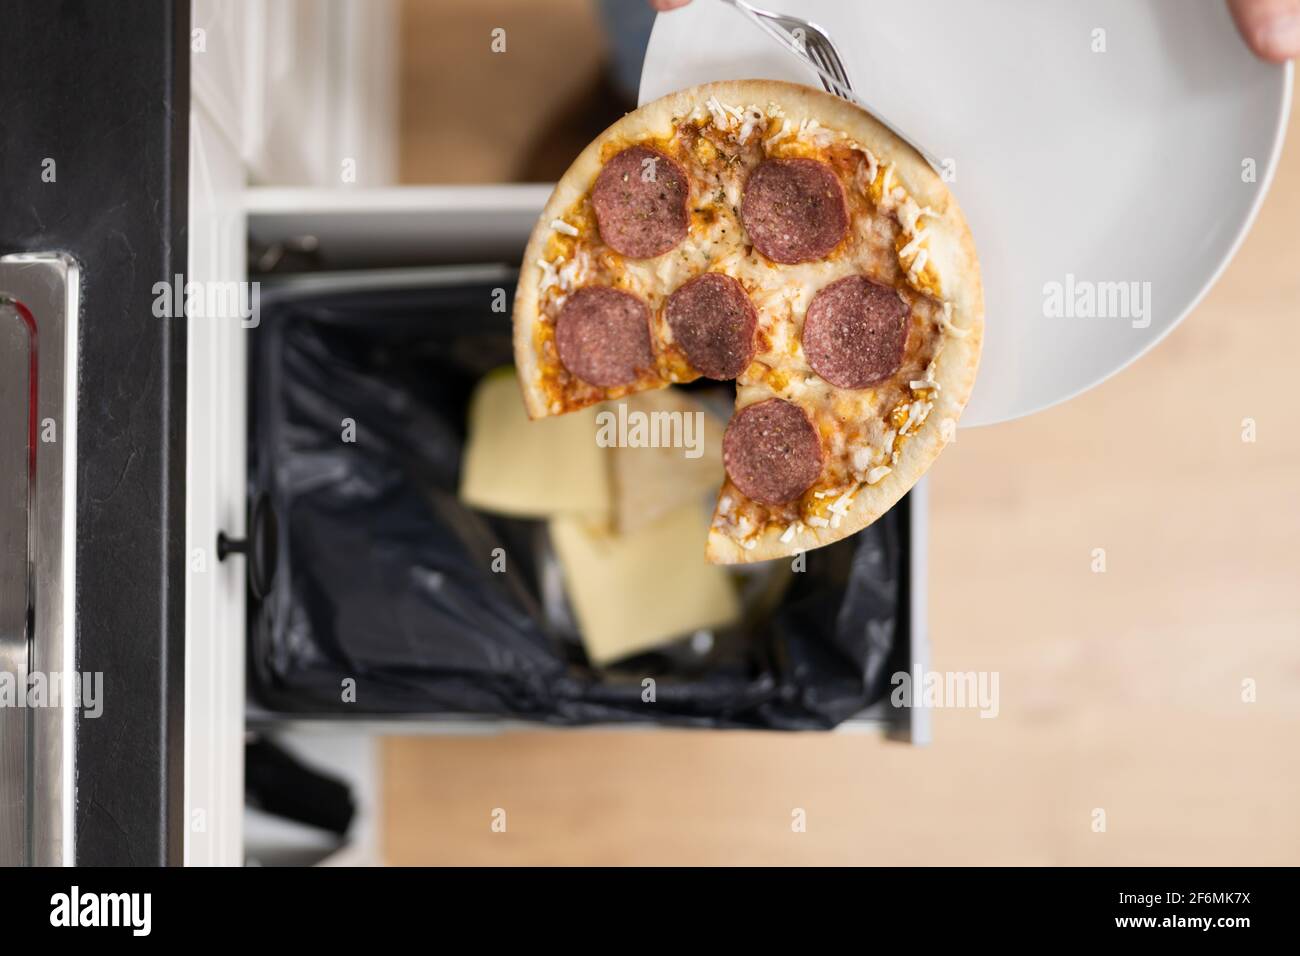 Food Waste. Throw Away Pizza In Dustbin Stock Photo